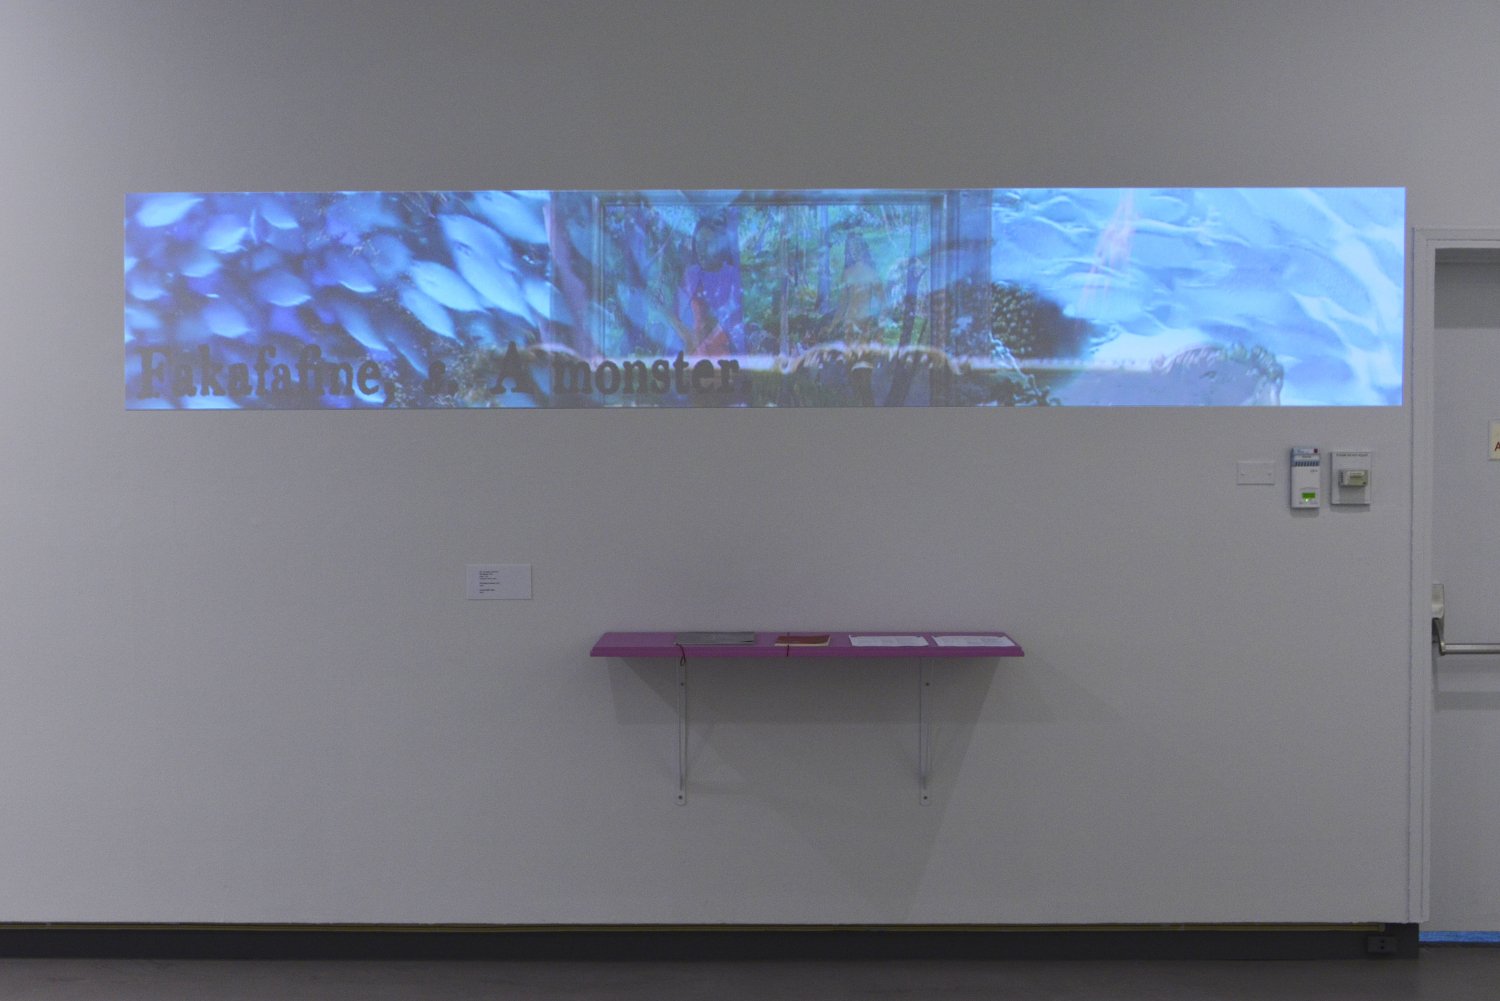  Dan Taulapapa McMullin,  The Wound,   2022, video, 7:53. Collection of the artist.  